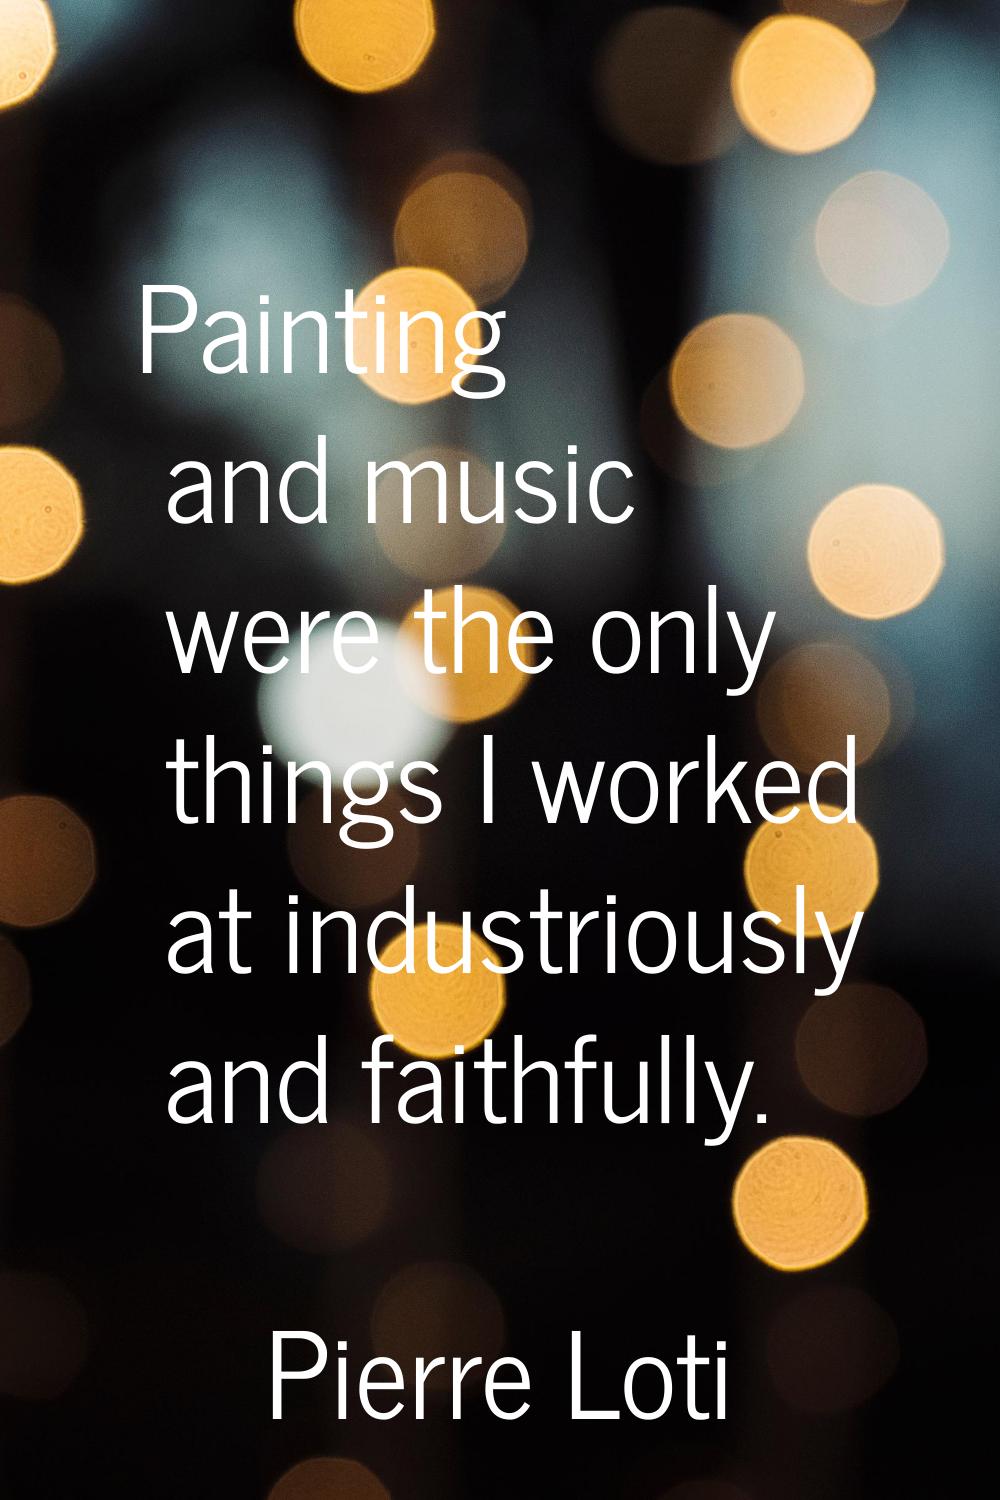 Painting and music were the only things I worked at industriously and faithfully.